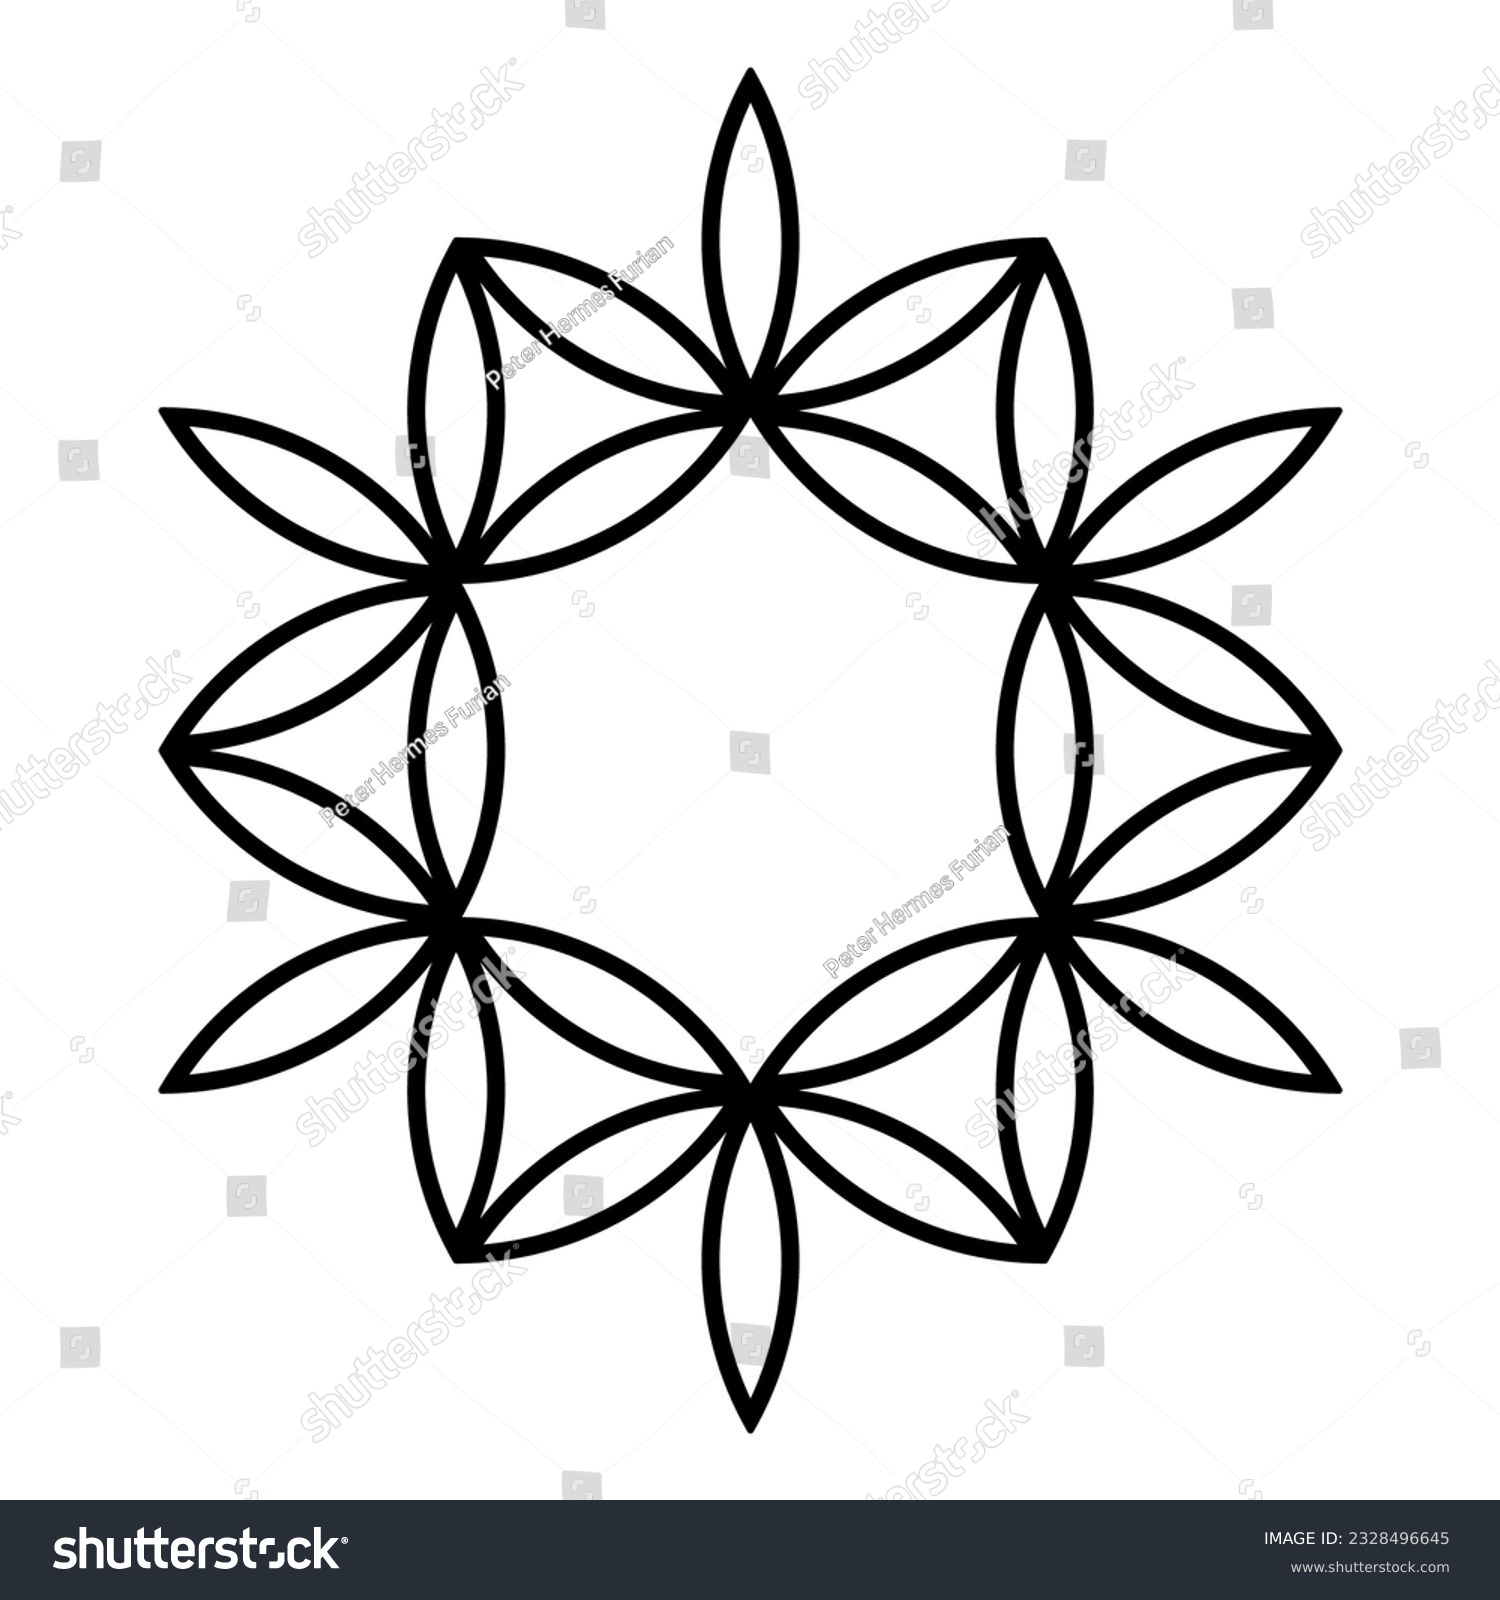 SVG of Symbol and pattern, resembling a flower. Vesica piscis shaped lenses, derived from a Flower of Life, creating a 12-pointed star. Modeled on a crop circle pattern, found near Warminster, Wiltshire. svg